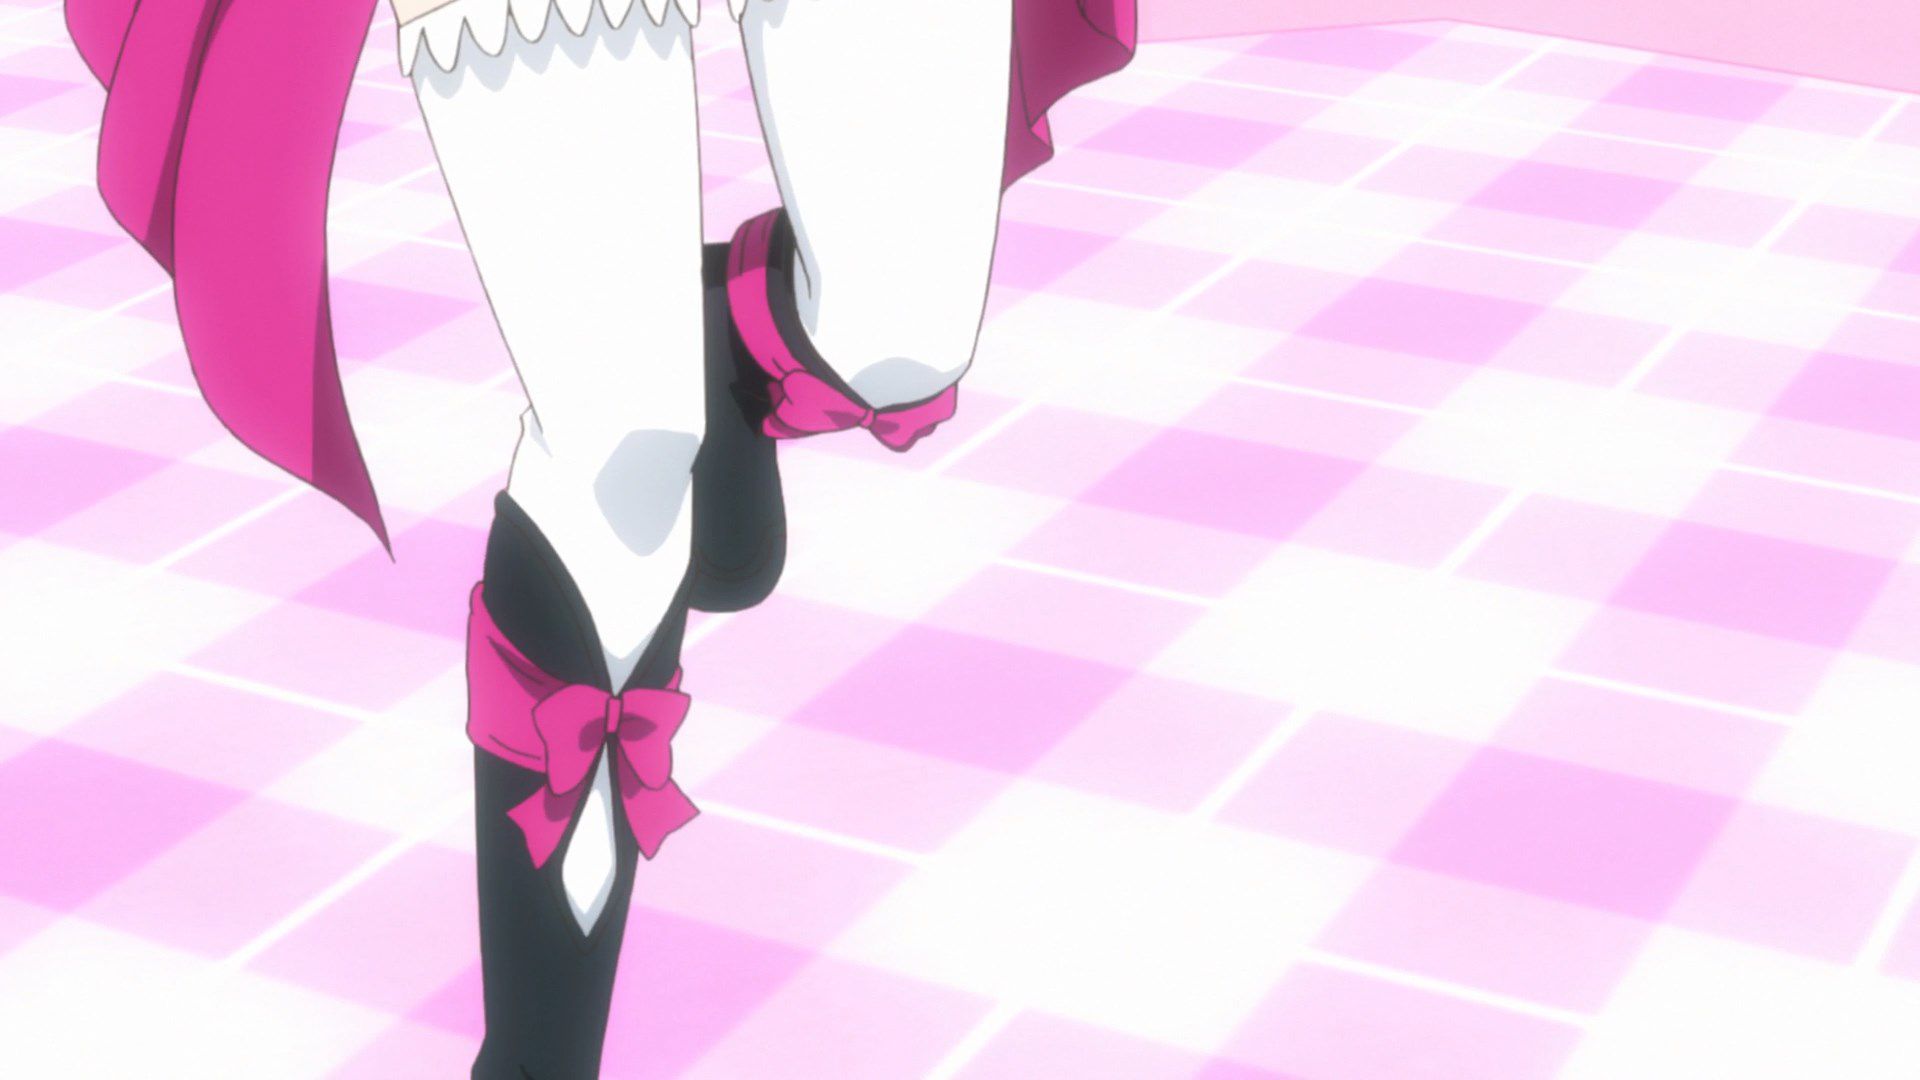 [God images] "love live! ' Μm ' PV's leg is too erotic everyone wakes up to a leg fetish of wwwww 76